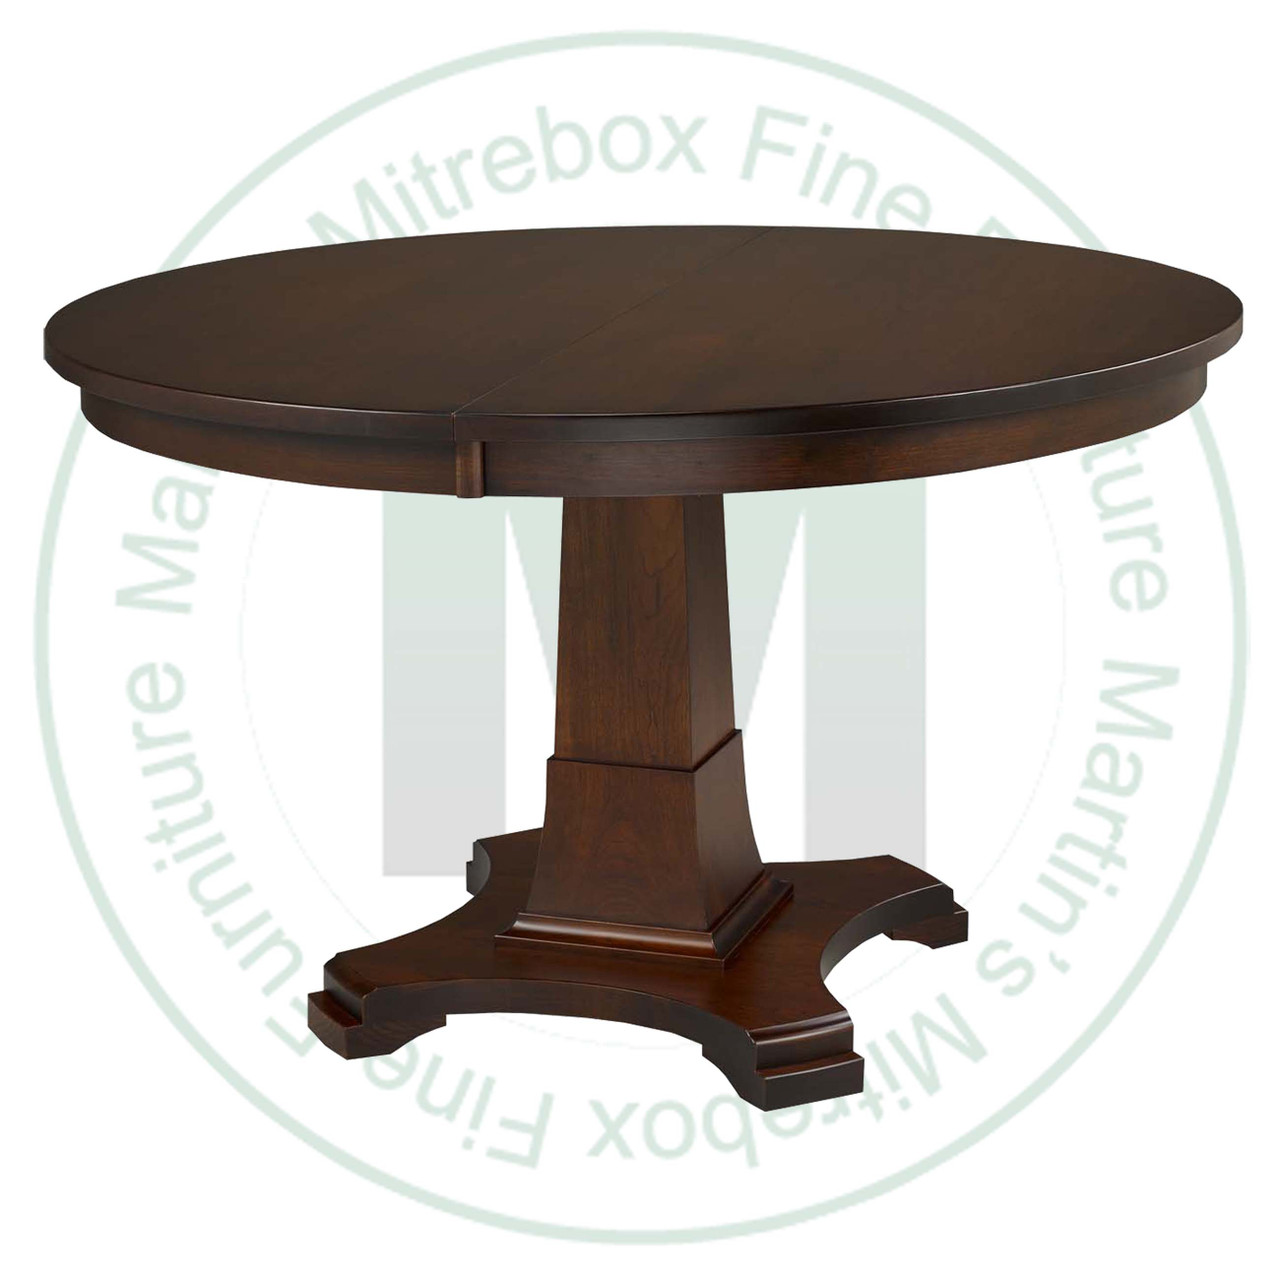 Wormy Maple Abbey Single Pedestal Table 54''D x 54''W x 30''H With 1 - 12'' Leaf. Table Has 1.25'' Thick Top